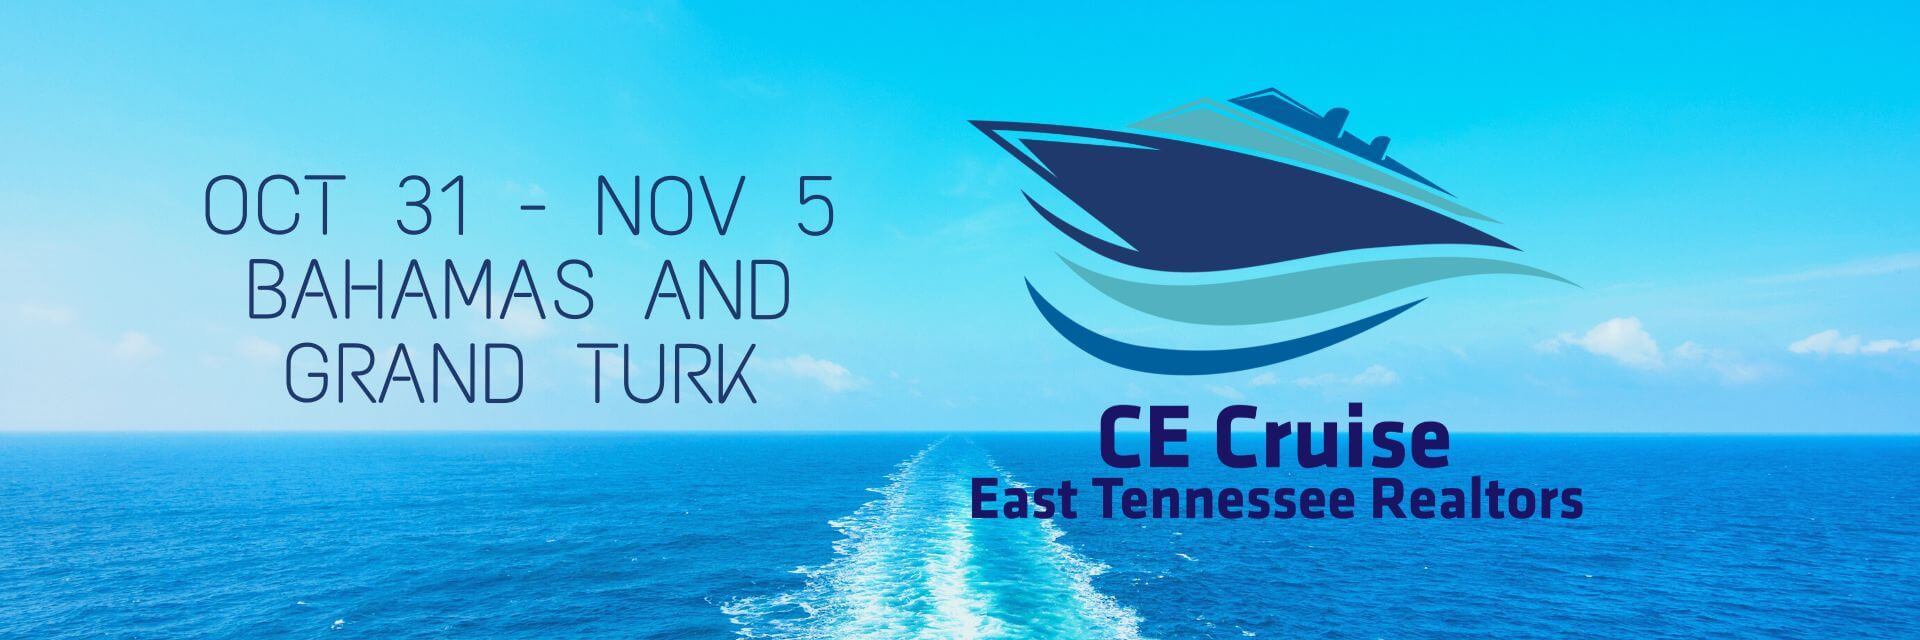 East Tennessee Realtors CE Cruise